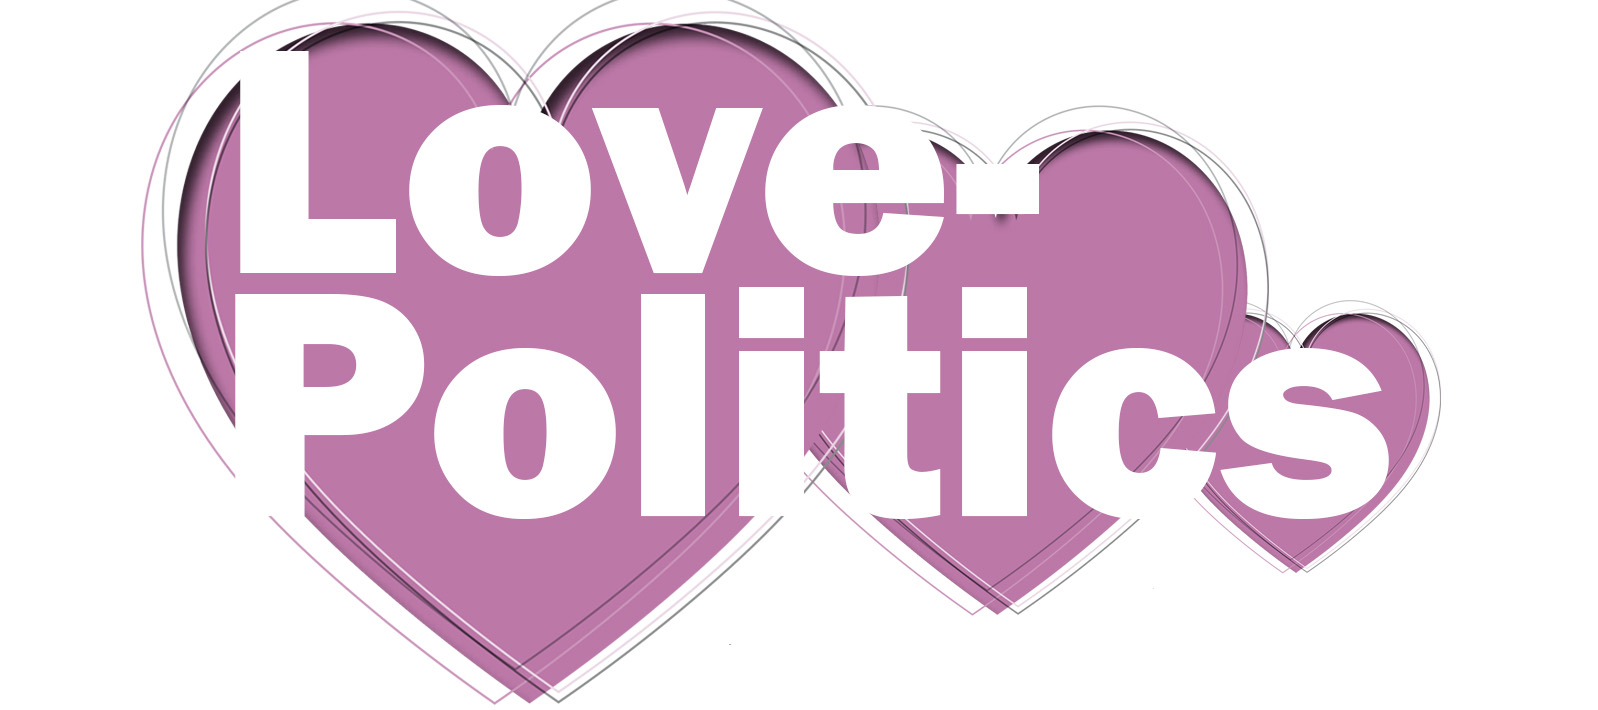 The words "love-politics" over three contiguous illustrated hearts.